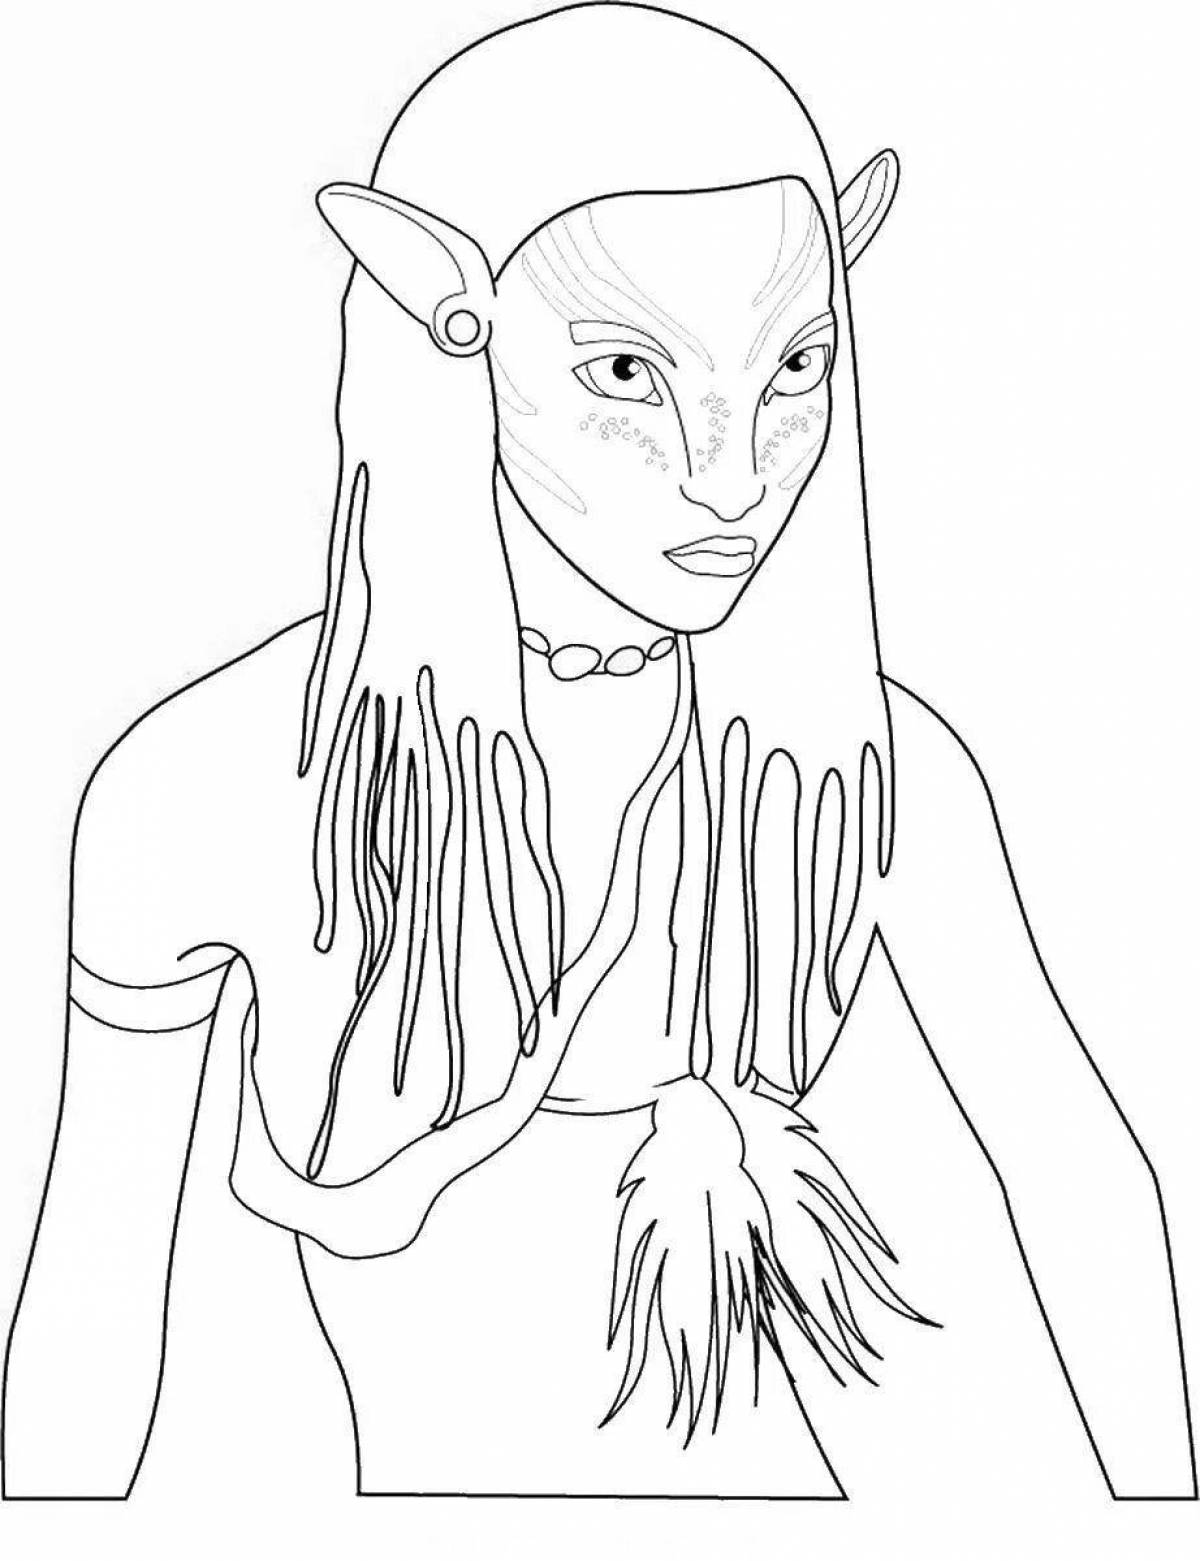 Luxury avatar coloring page